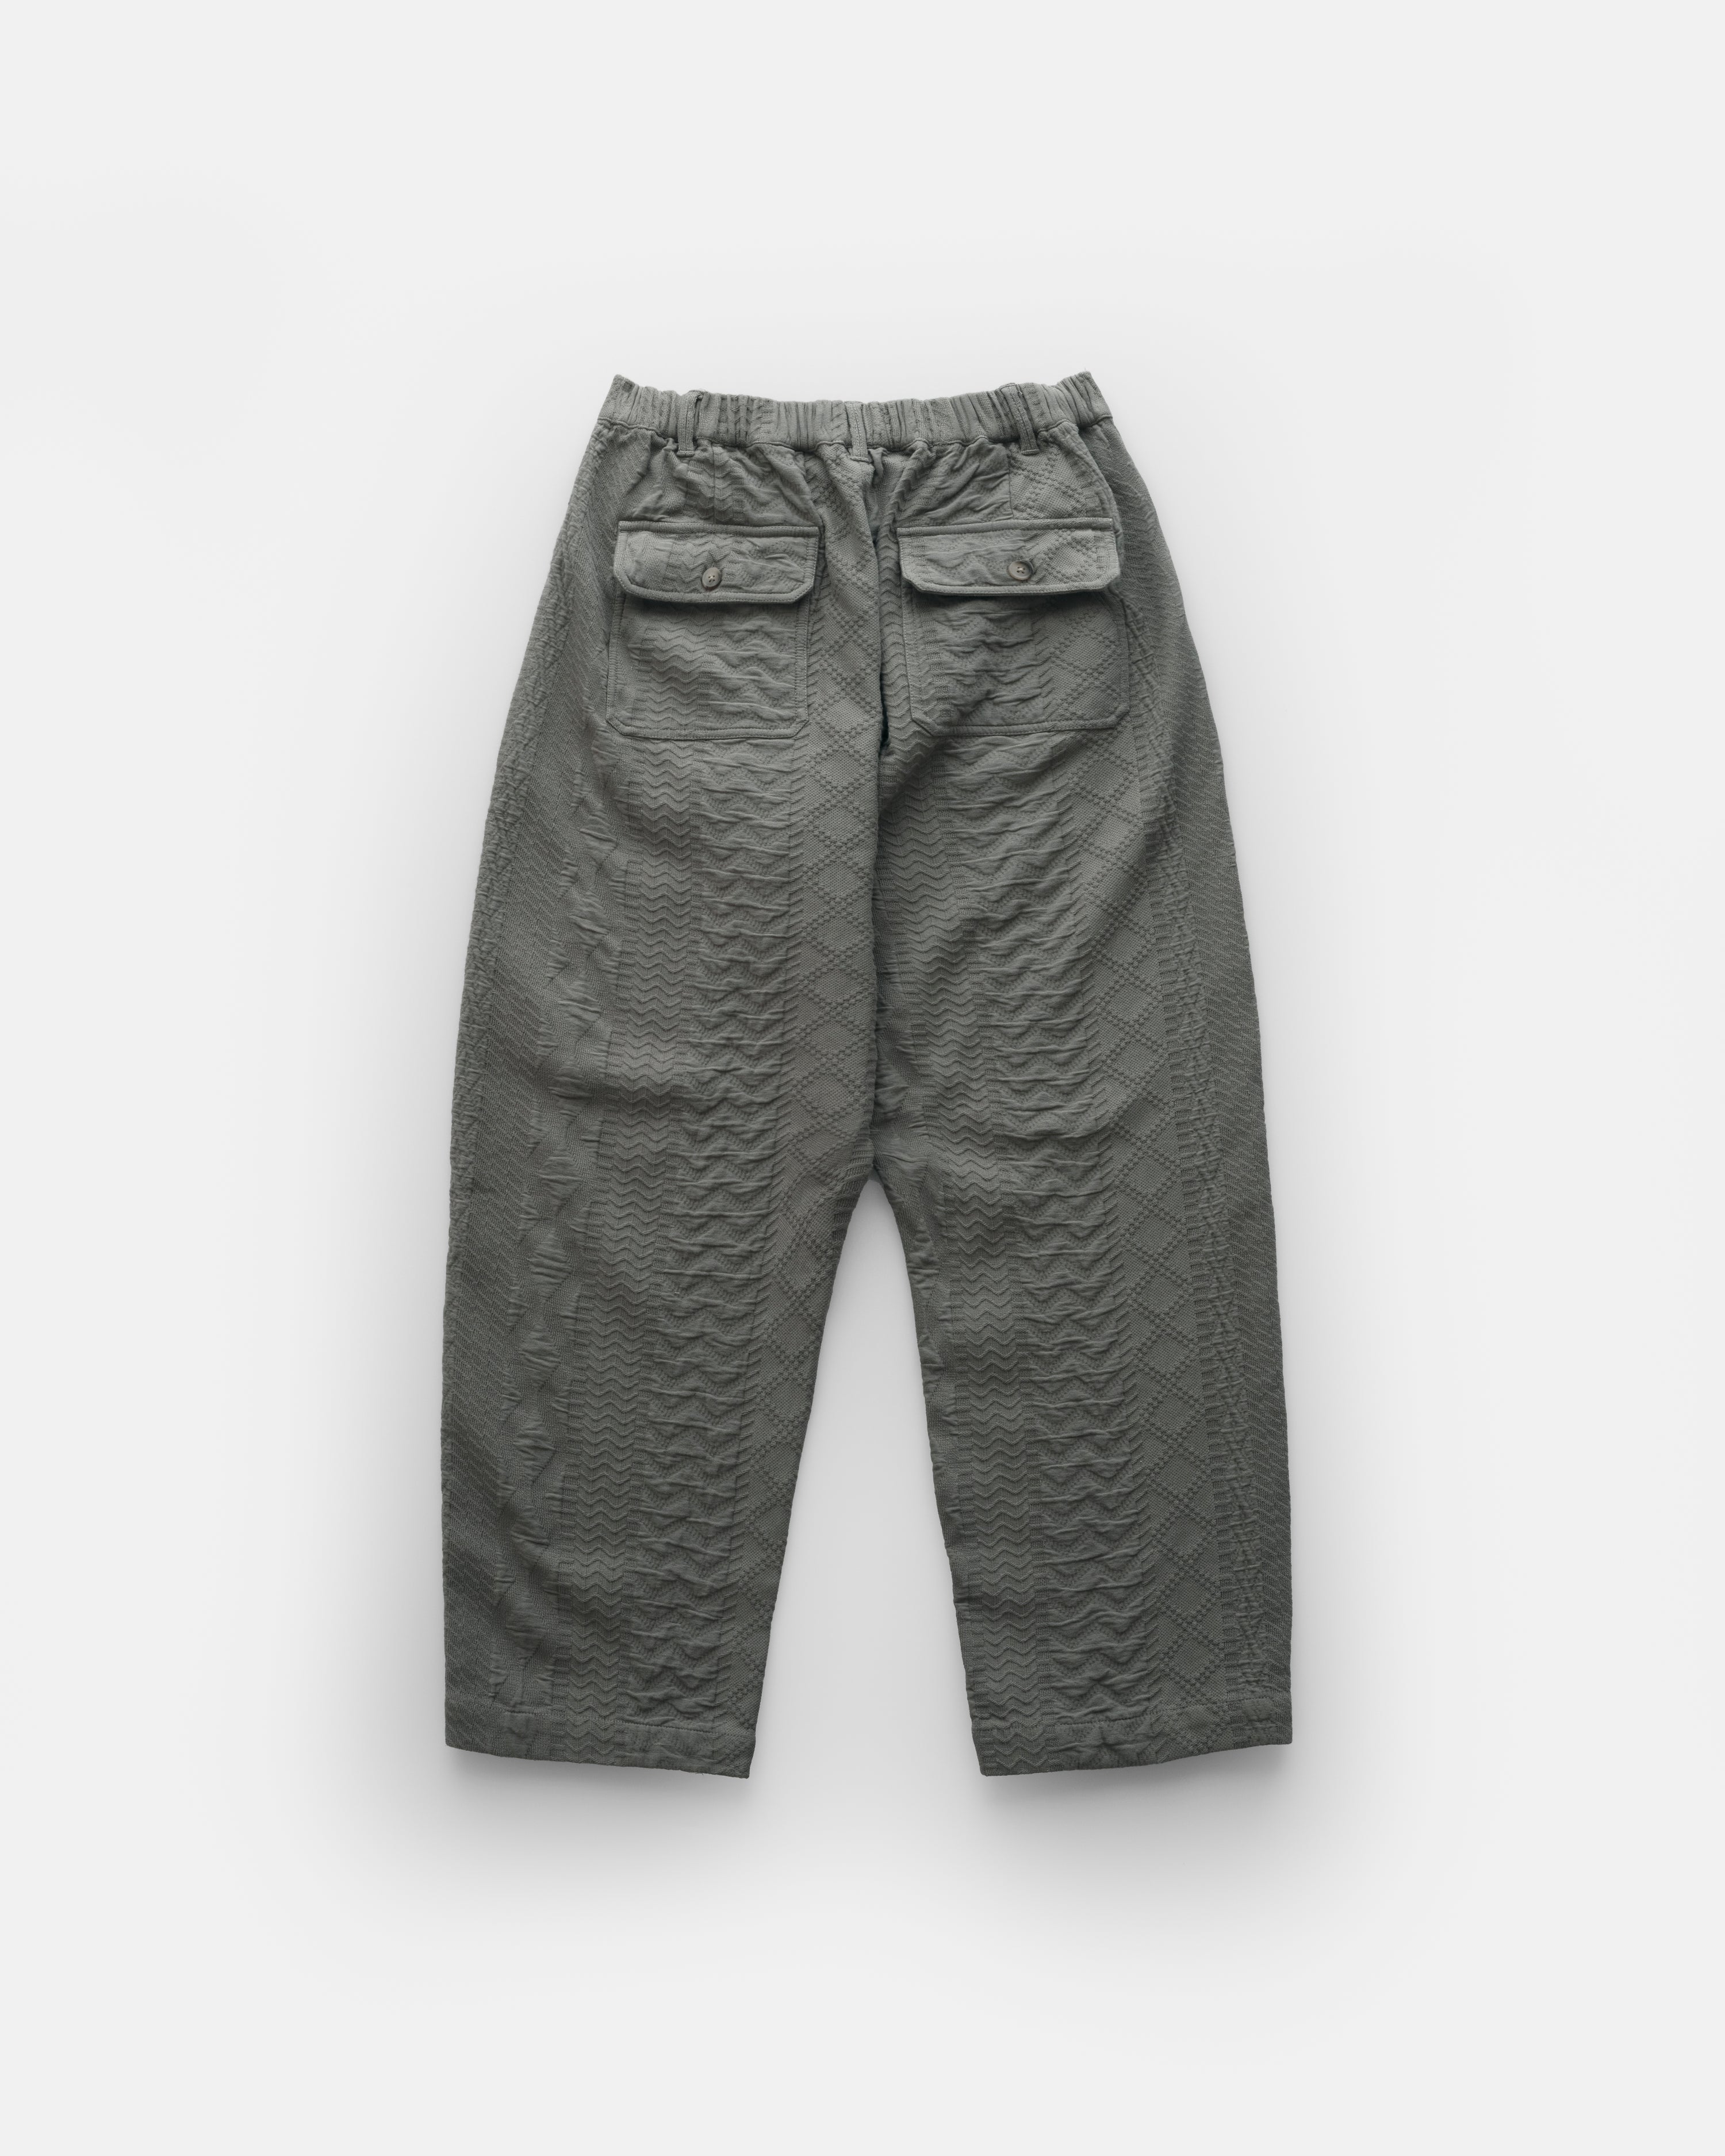 ROY BAKER PANT - MULLED BASIL DOUBLE WEAVE COTTON